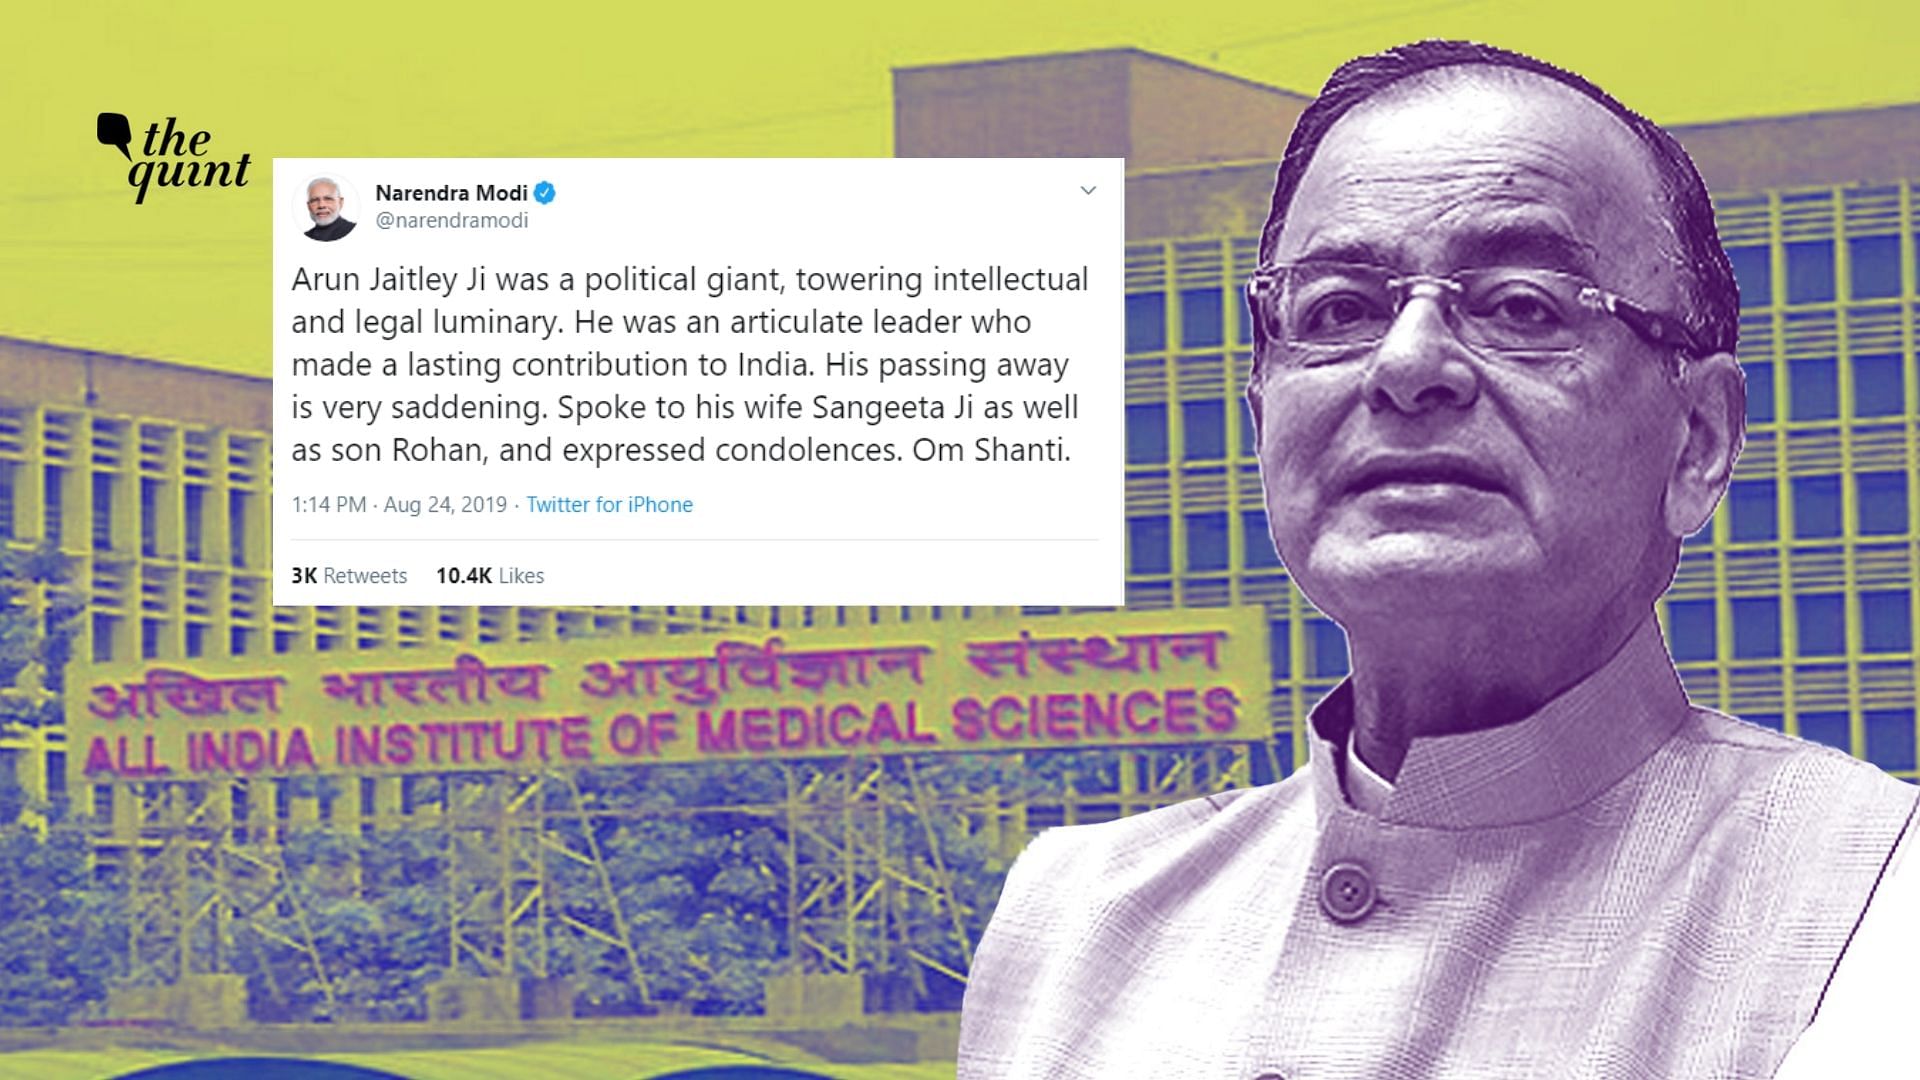 Arun Jaitley had been admitted to AIIMS hospital on 9 August after complaining of breathlessness.